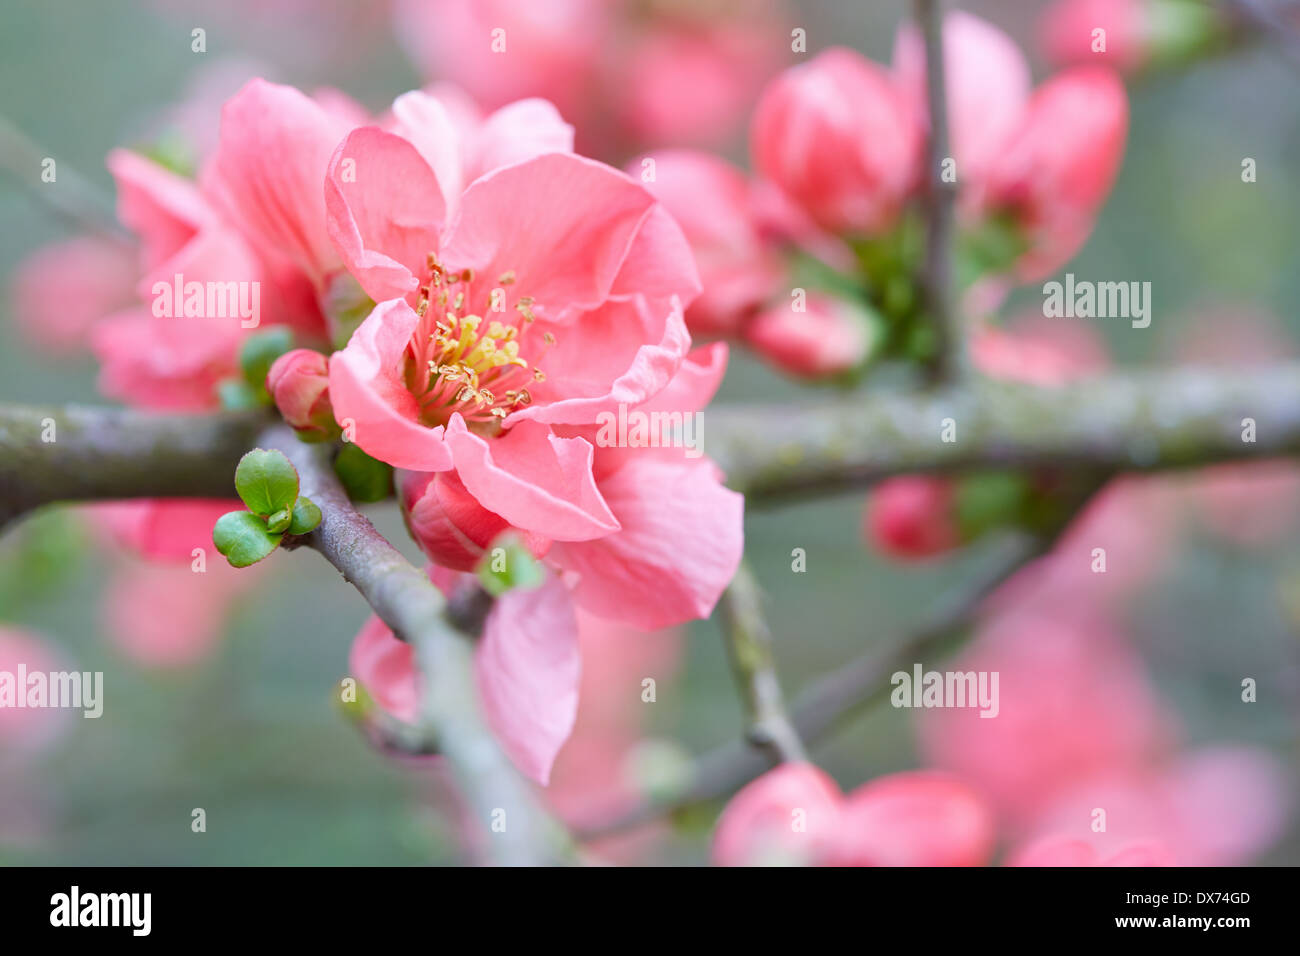 Spring flowers closeup with pink blossom and fresh buds Stock Photo